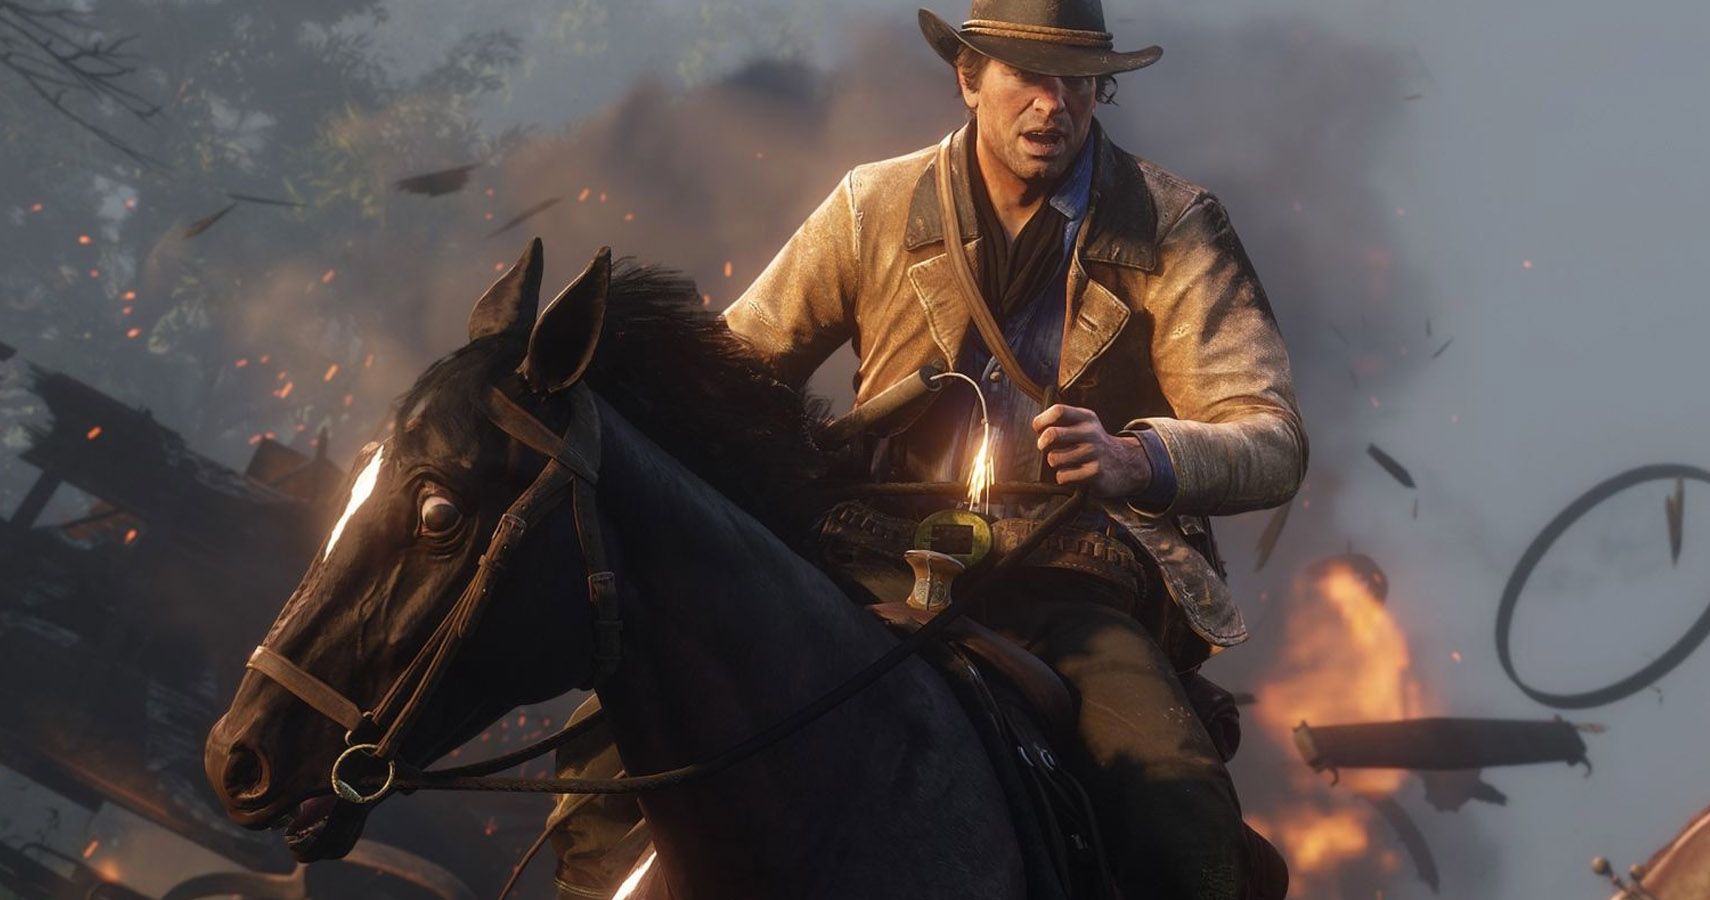 10 Arthur Morgan Facts, The Manly Cowboy from Red Dead Redemption 2